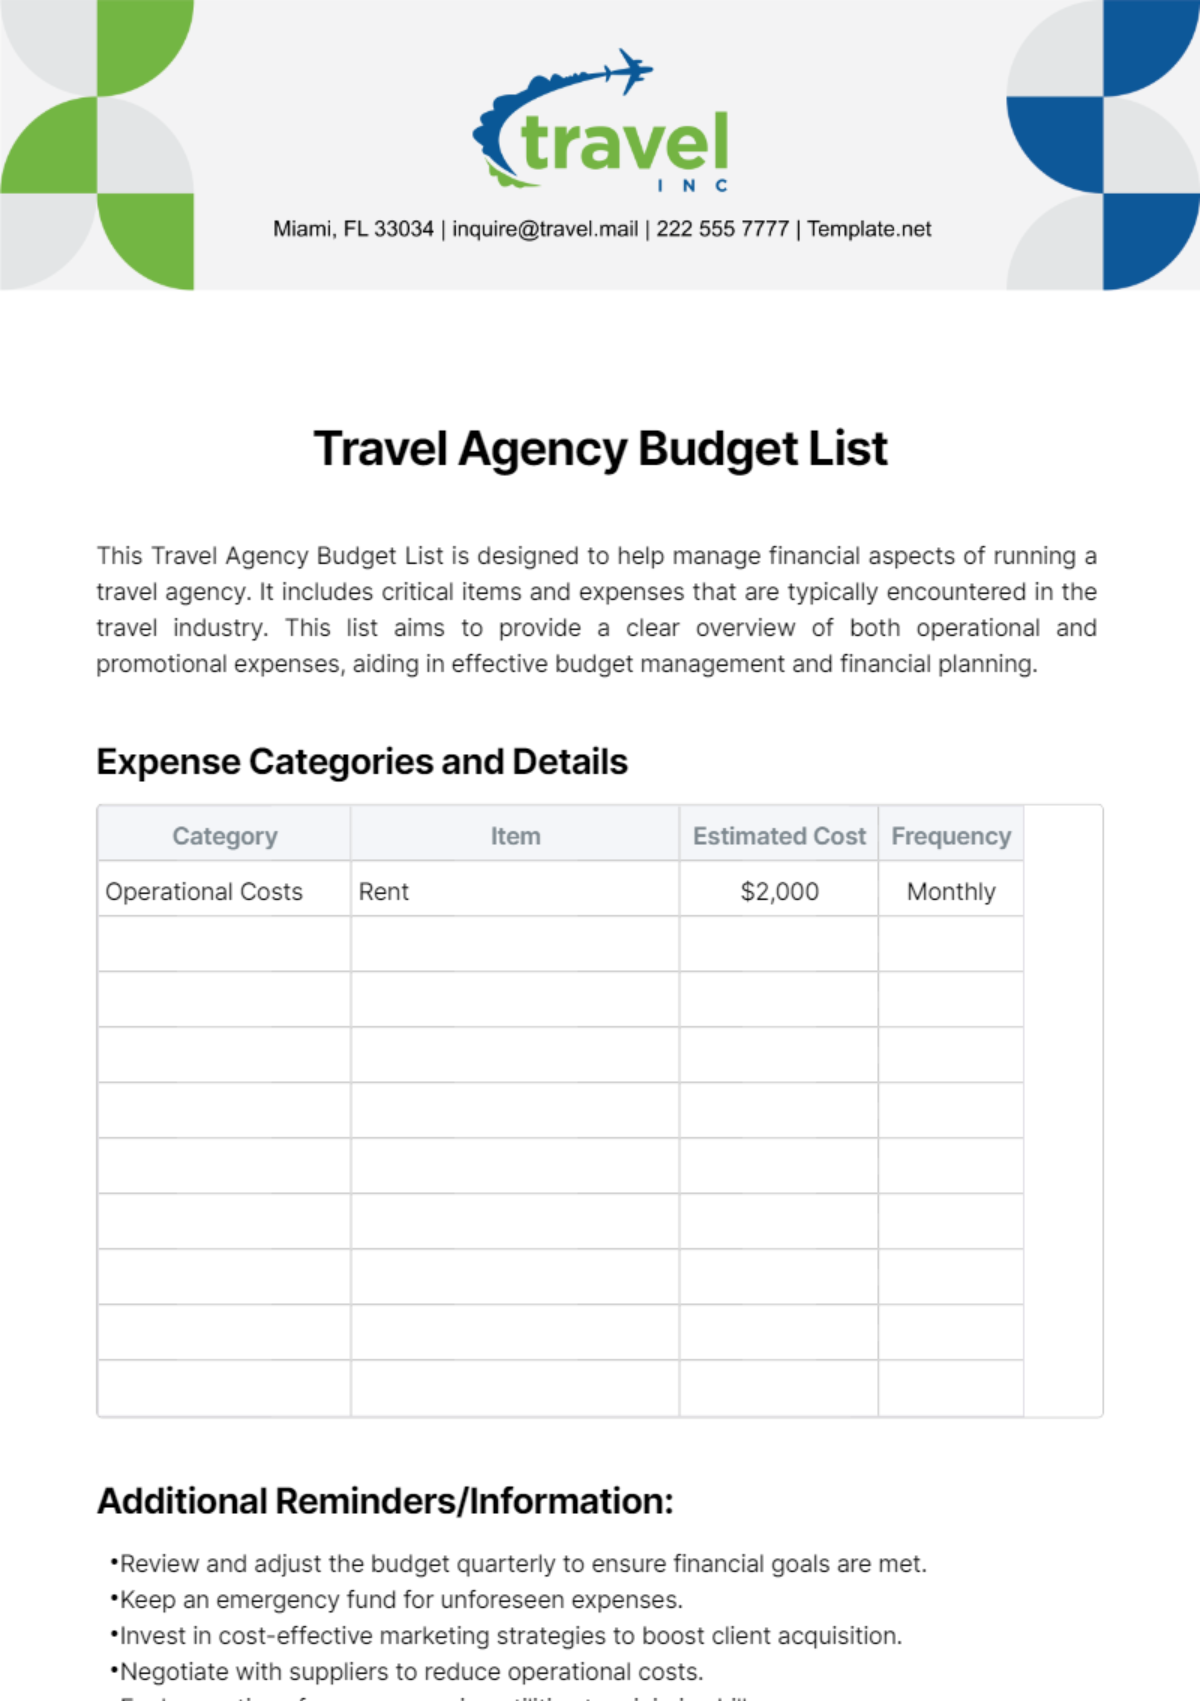 Free Travel Agency Budget List Template